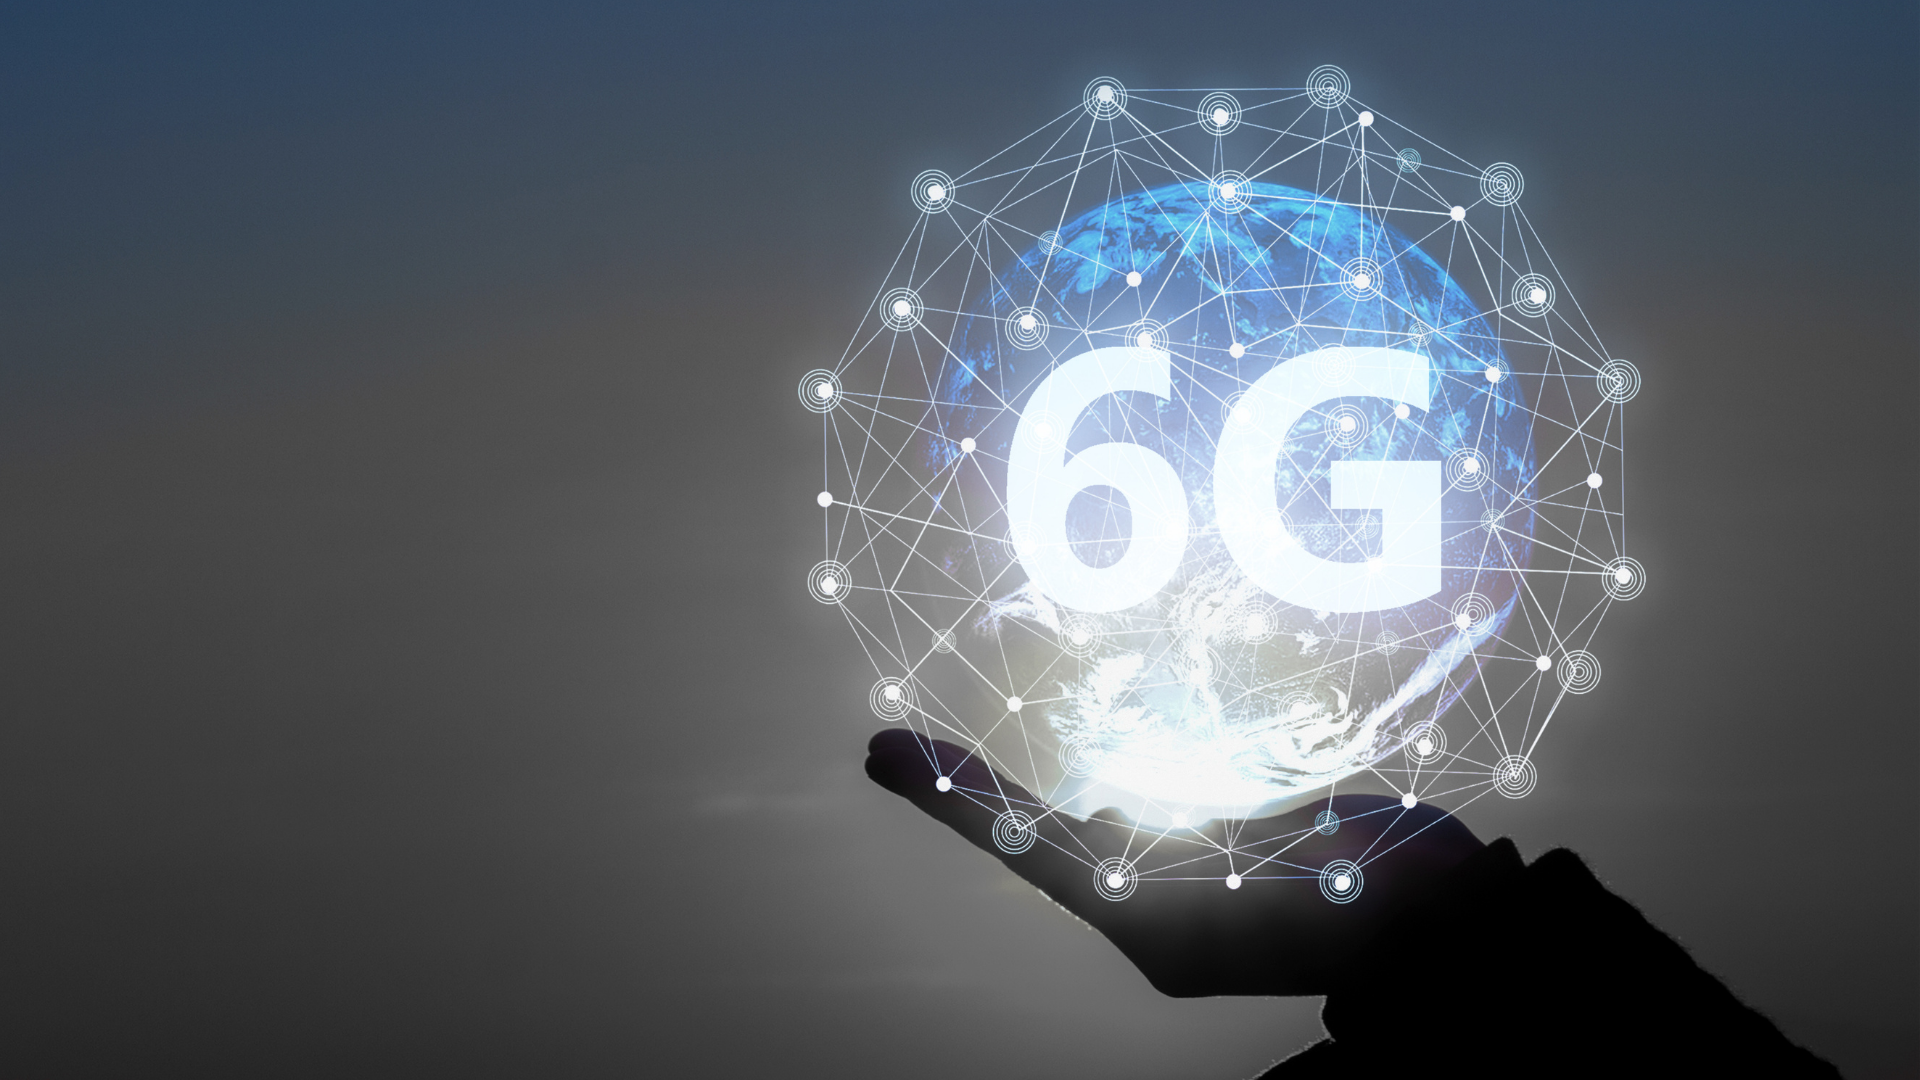 The envisioned key enabling technologies for 6G and beyond wireless